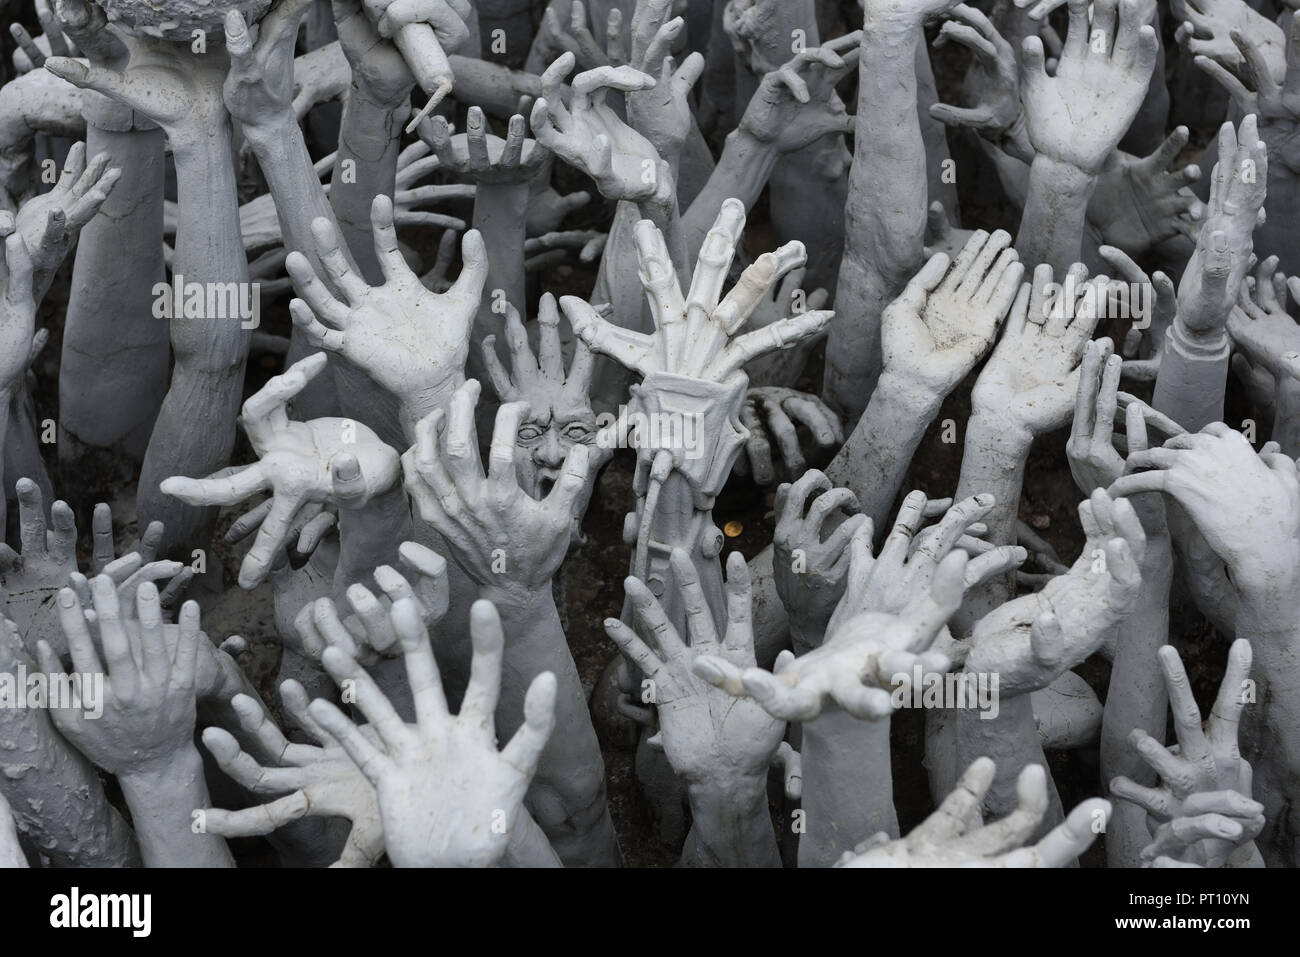 Carved hands reaching out by the artist Chalermchai Kositpipat in the grounds of Wat Rong Khun, Chiang Rai Province, Thailand Stock Photo